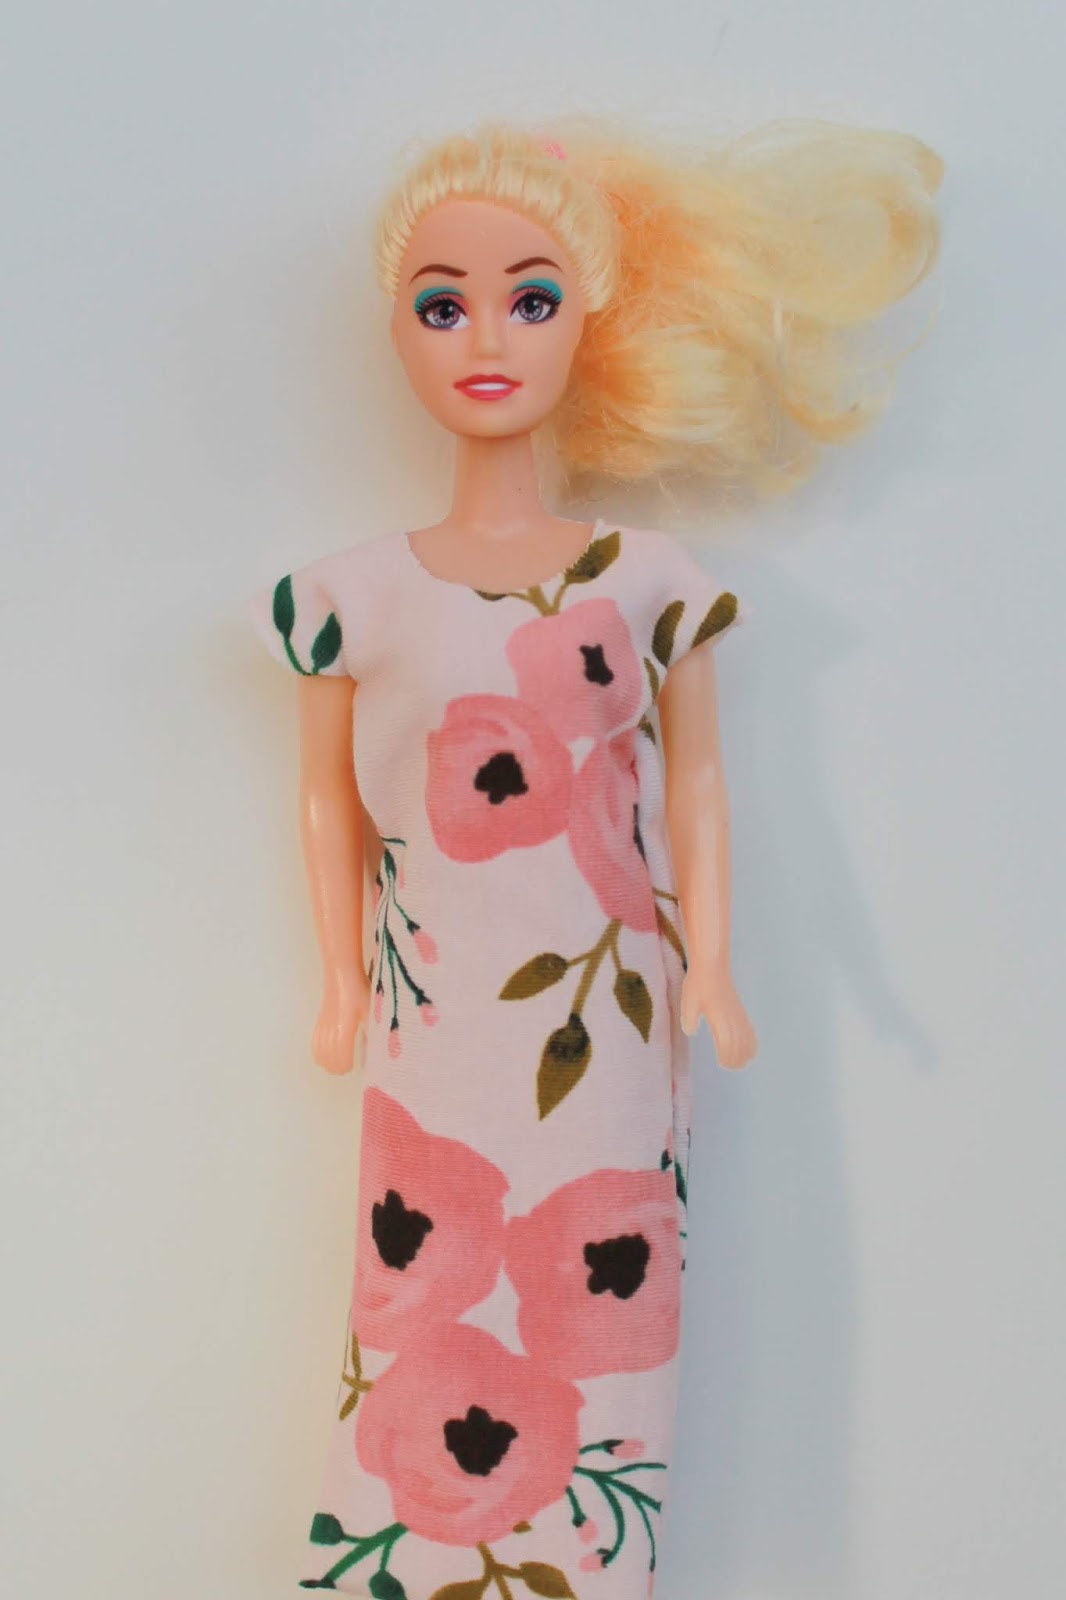 Sewing Patterns For Barbie Clothes: Easy Barbie Clothes Patterns: How to  Sew a Barbie Clothes See more